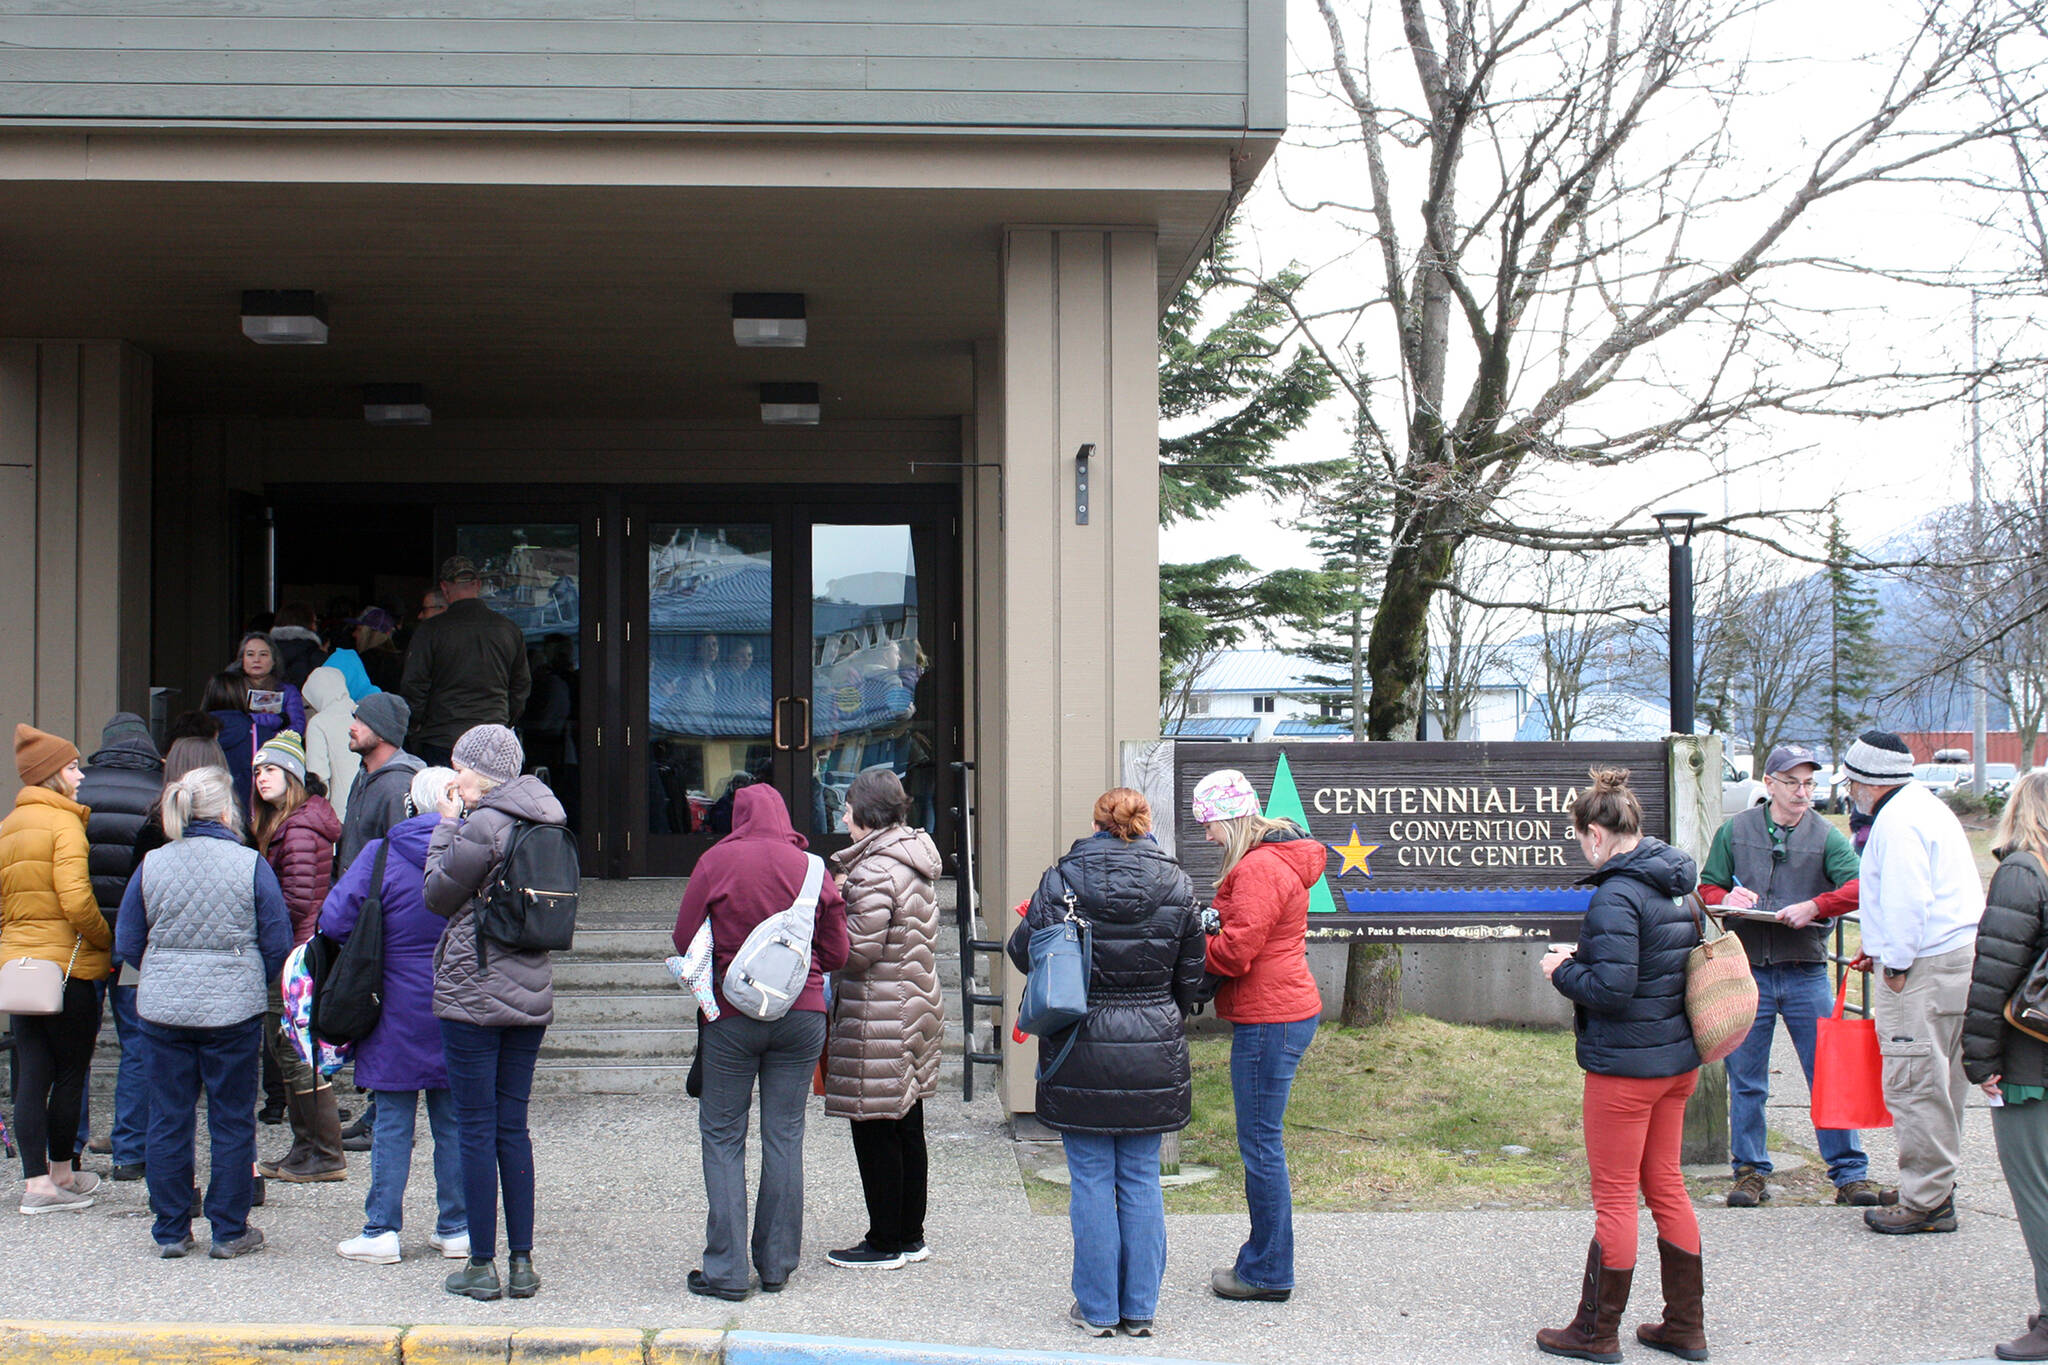 Ben Hohenstatt / Juneau Empire File 
A line forms outside Centennial Hall ahead of Juneau Public Market, Nov. 29, 2019. After a year off because of the pandemic, the market is returning this year with COVID-19 mitigation measures in place.